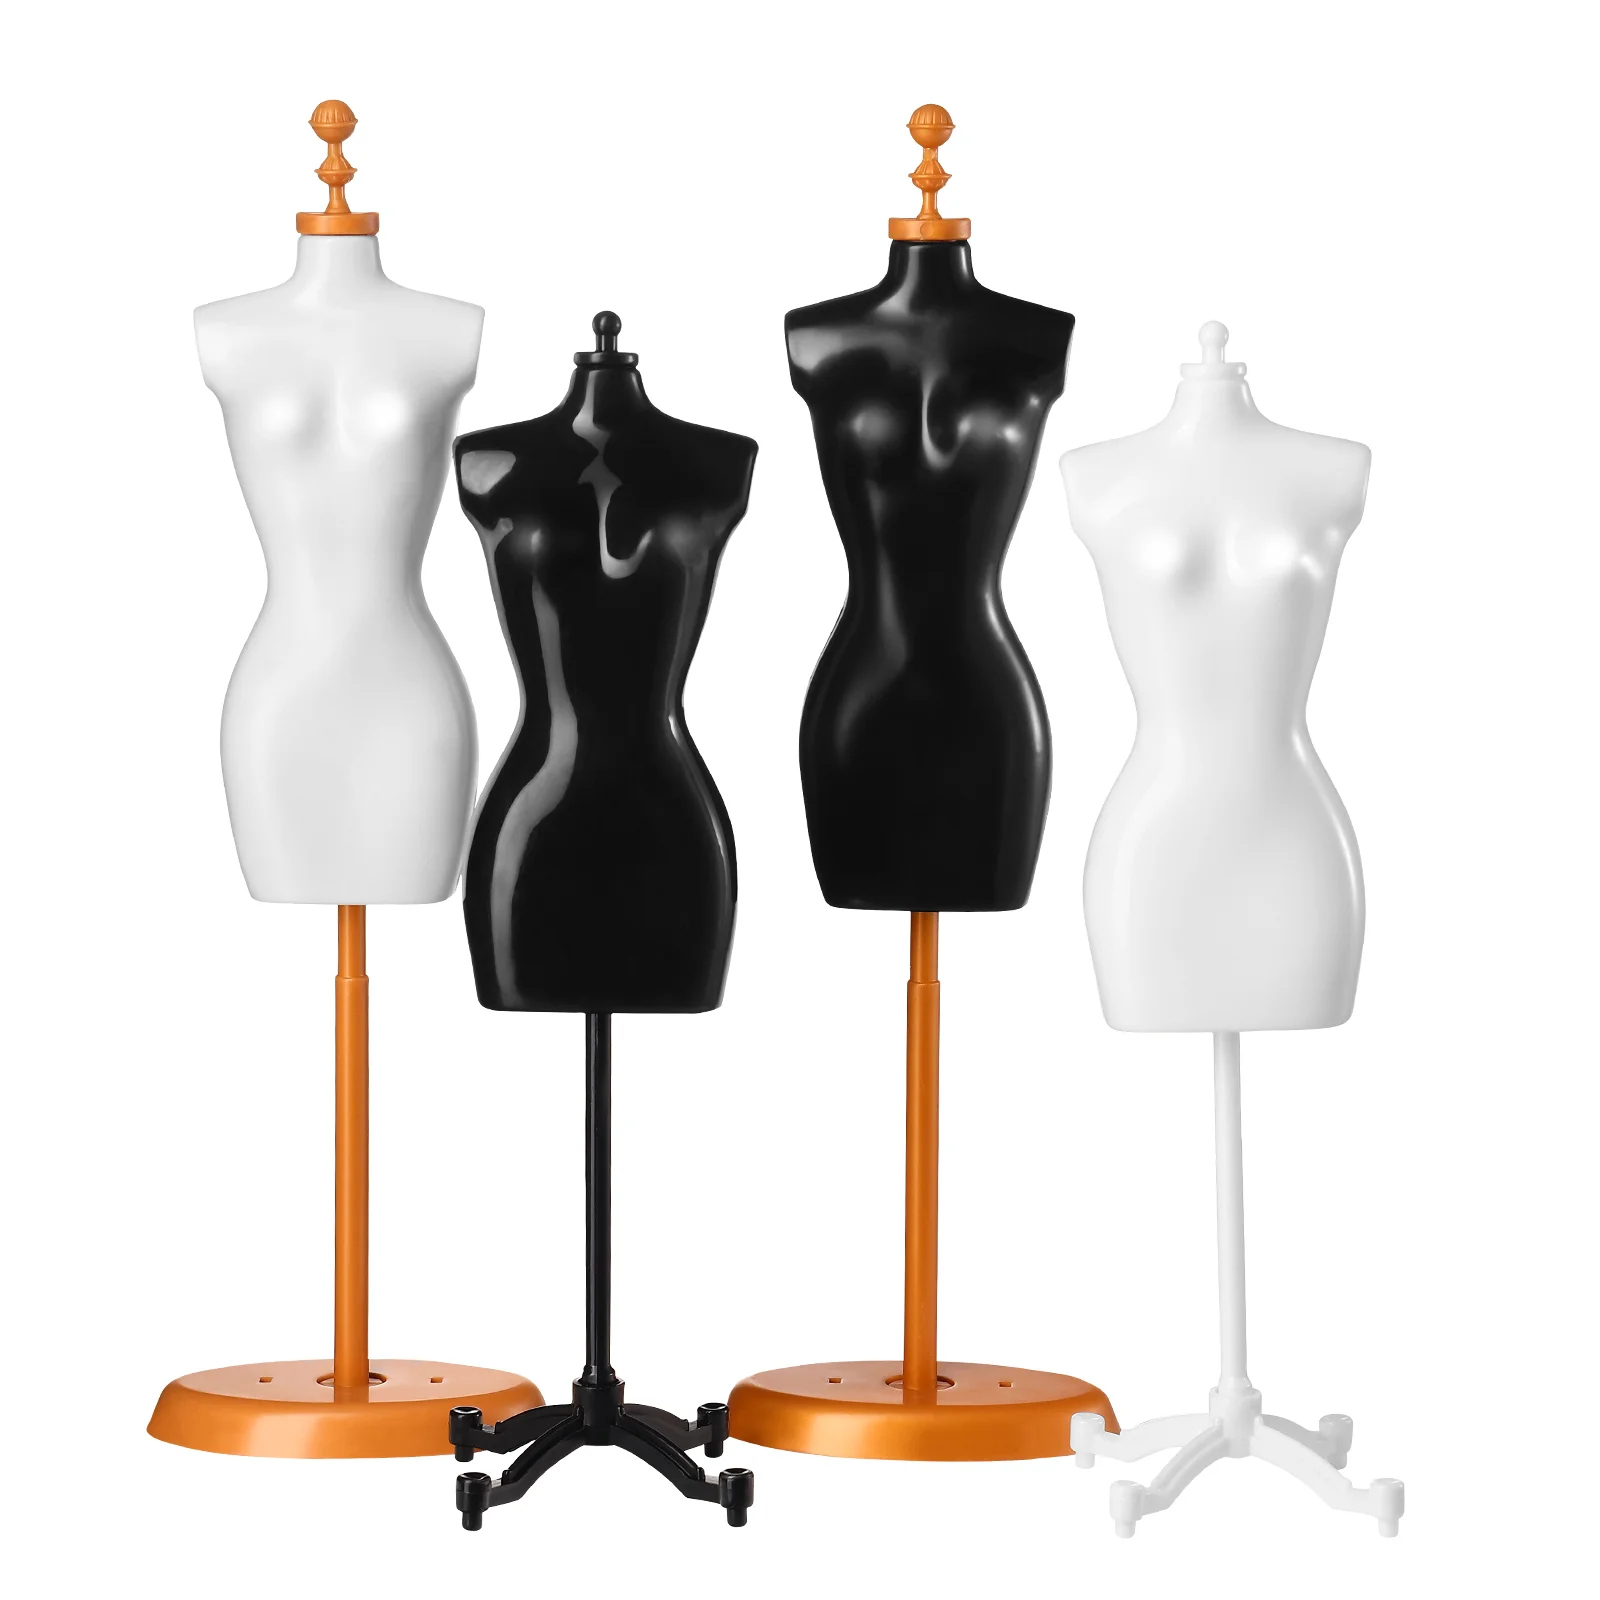 EXCEART 4pcs Doll Dress Form Mannequin Dress Form Mannequin Clothes Gown Female Dress Model Display Mannequin Body Display Holder Stand 